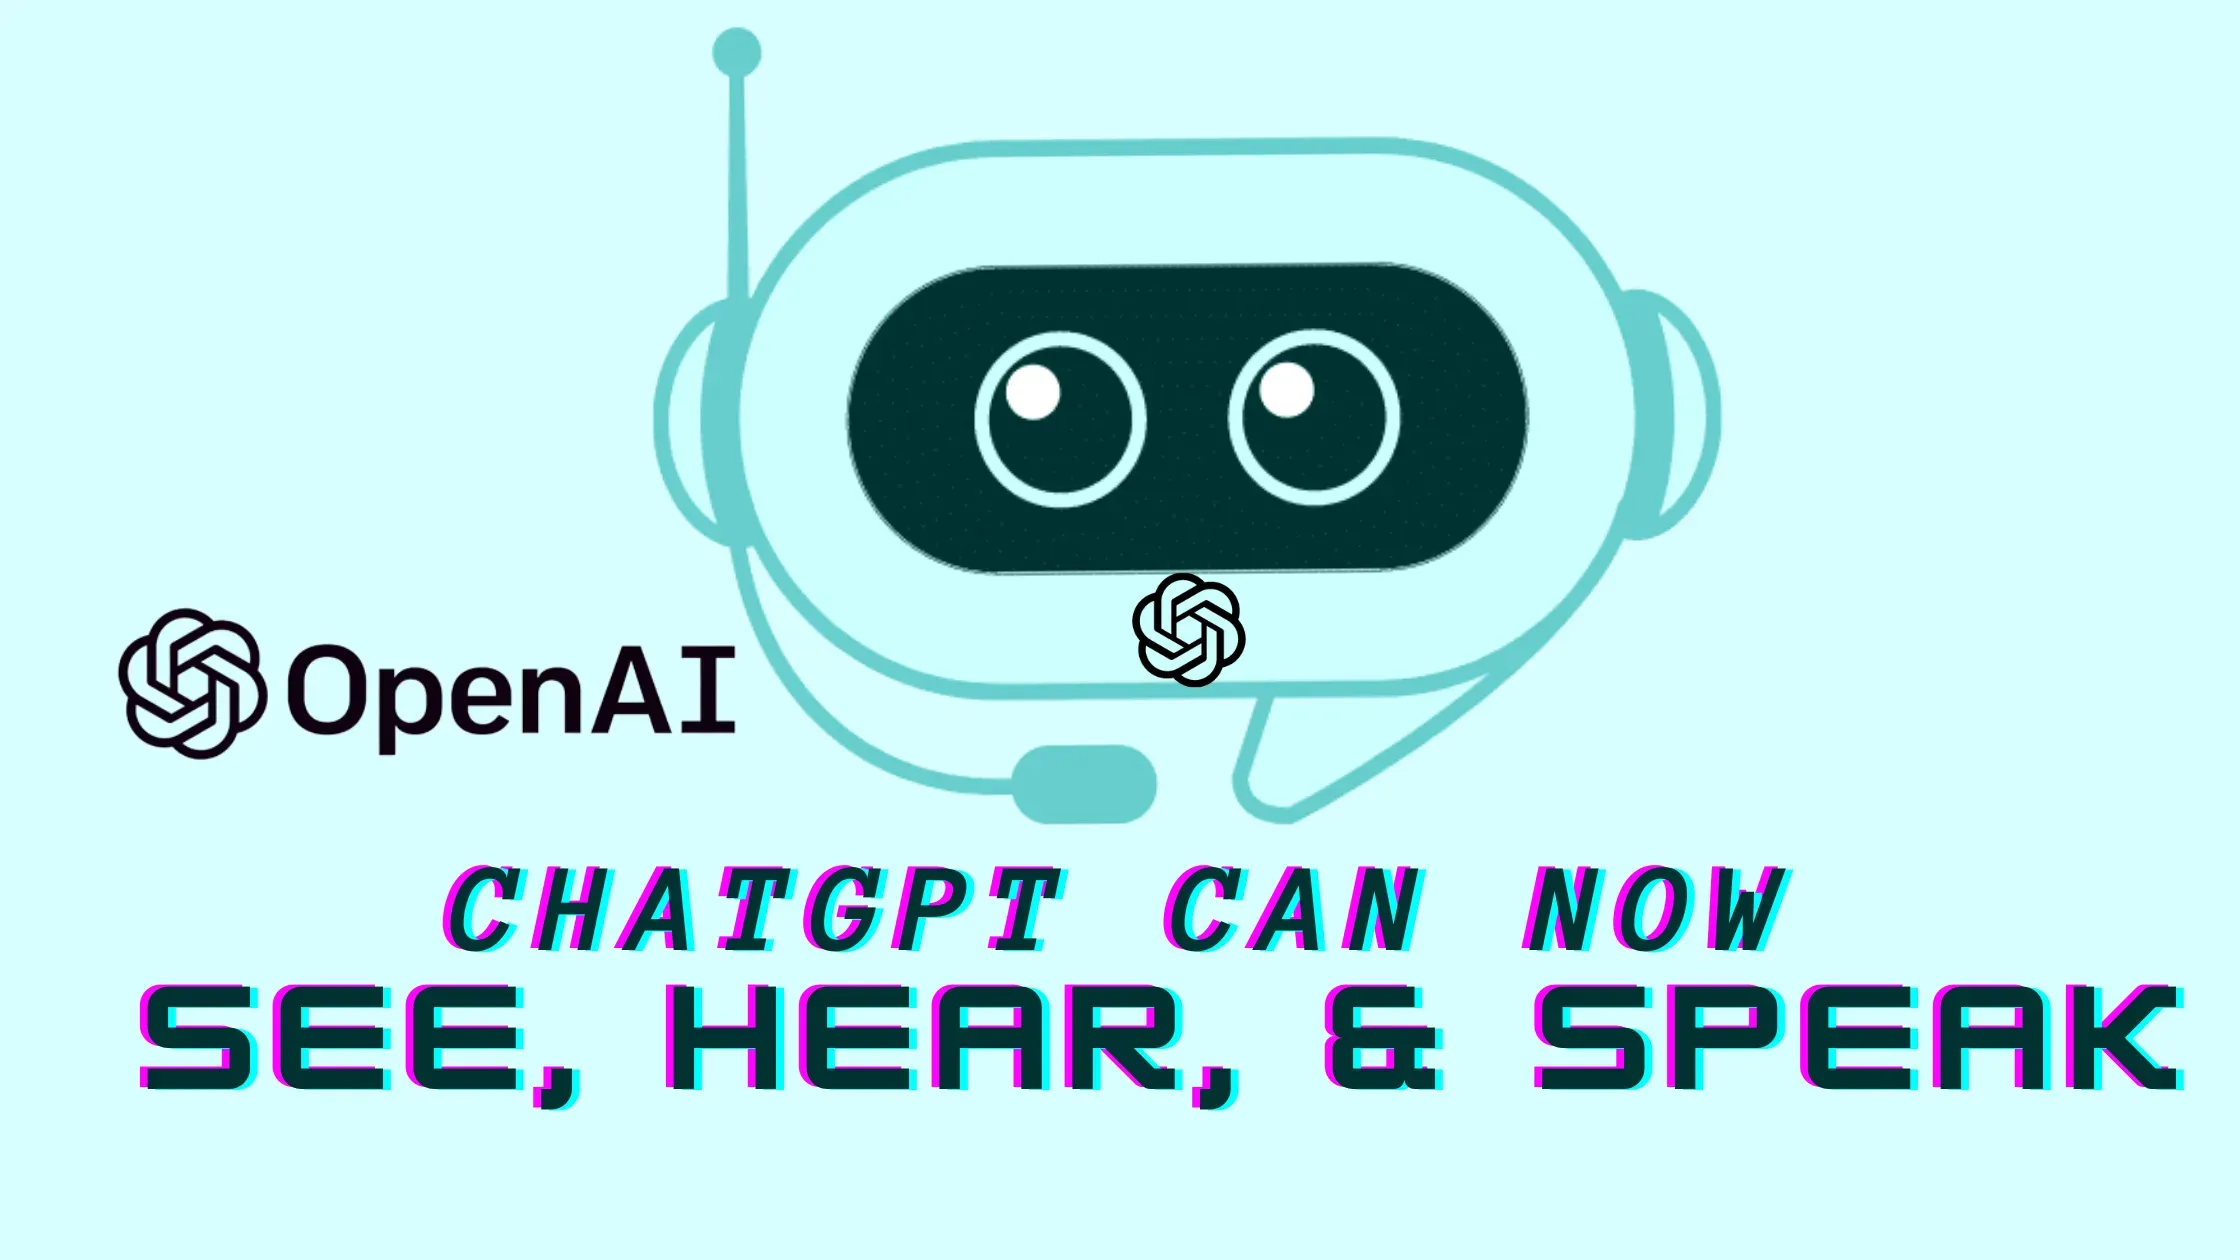 ChatGPT can now speak, listen and see images